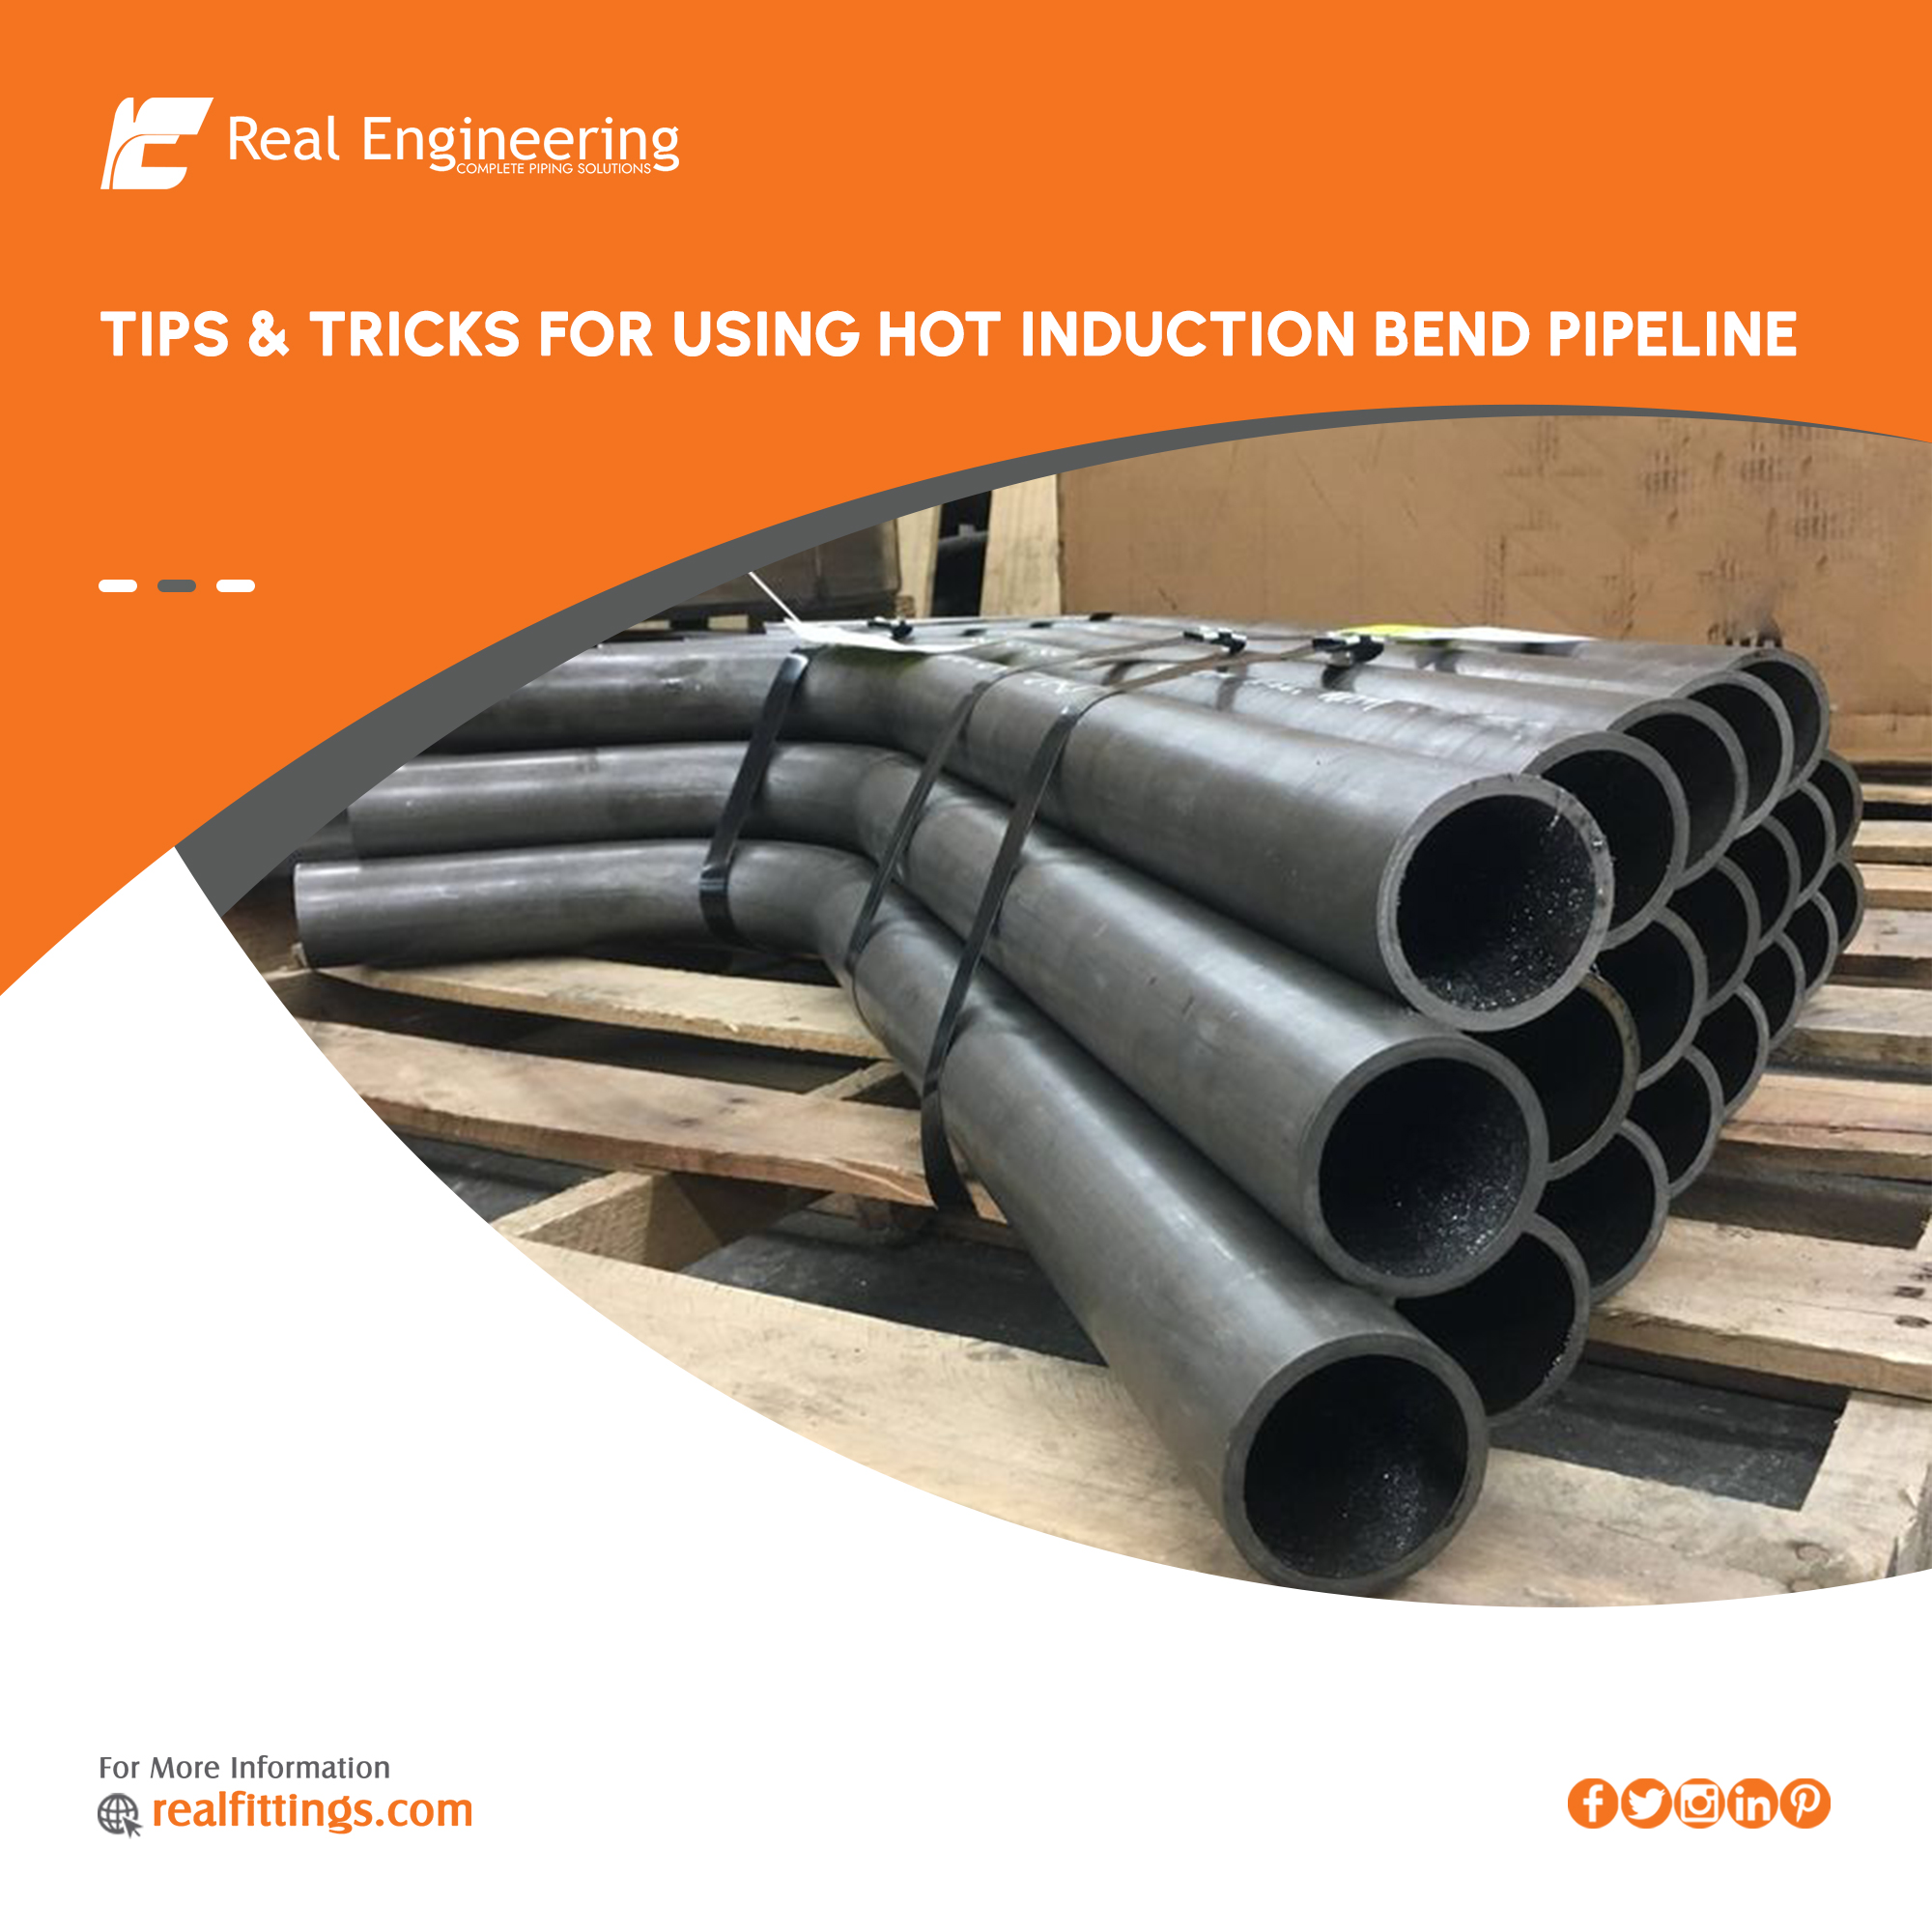 hot induction bends pipeline